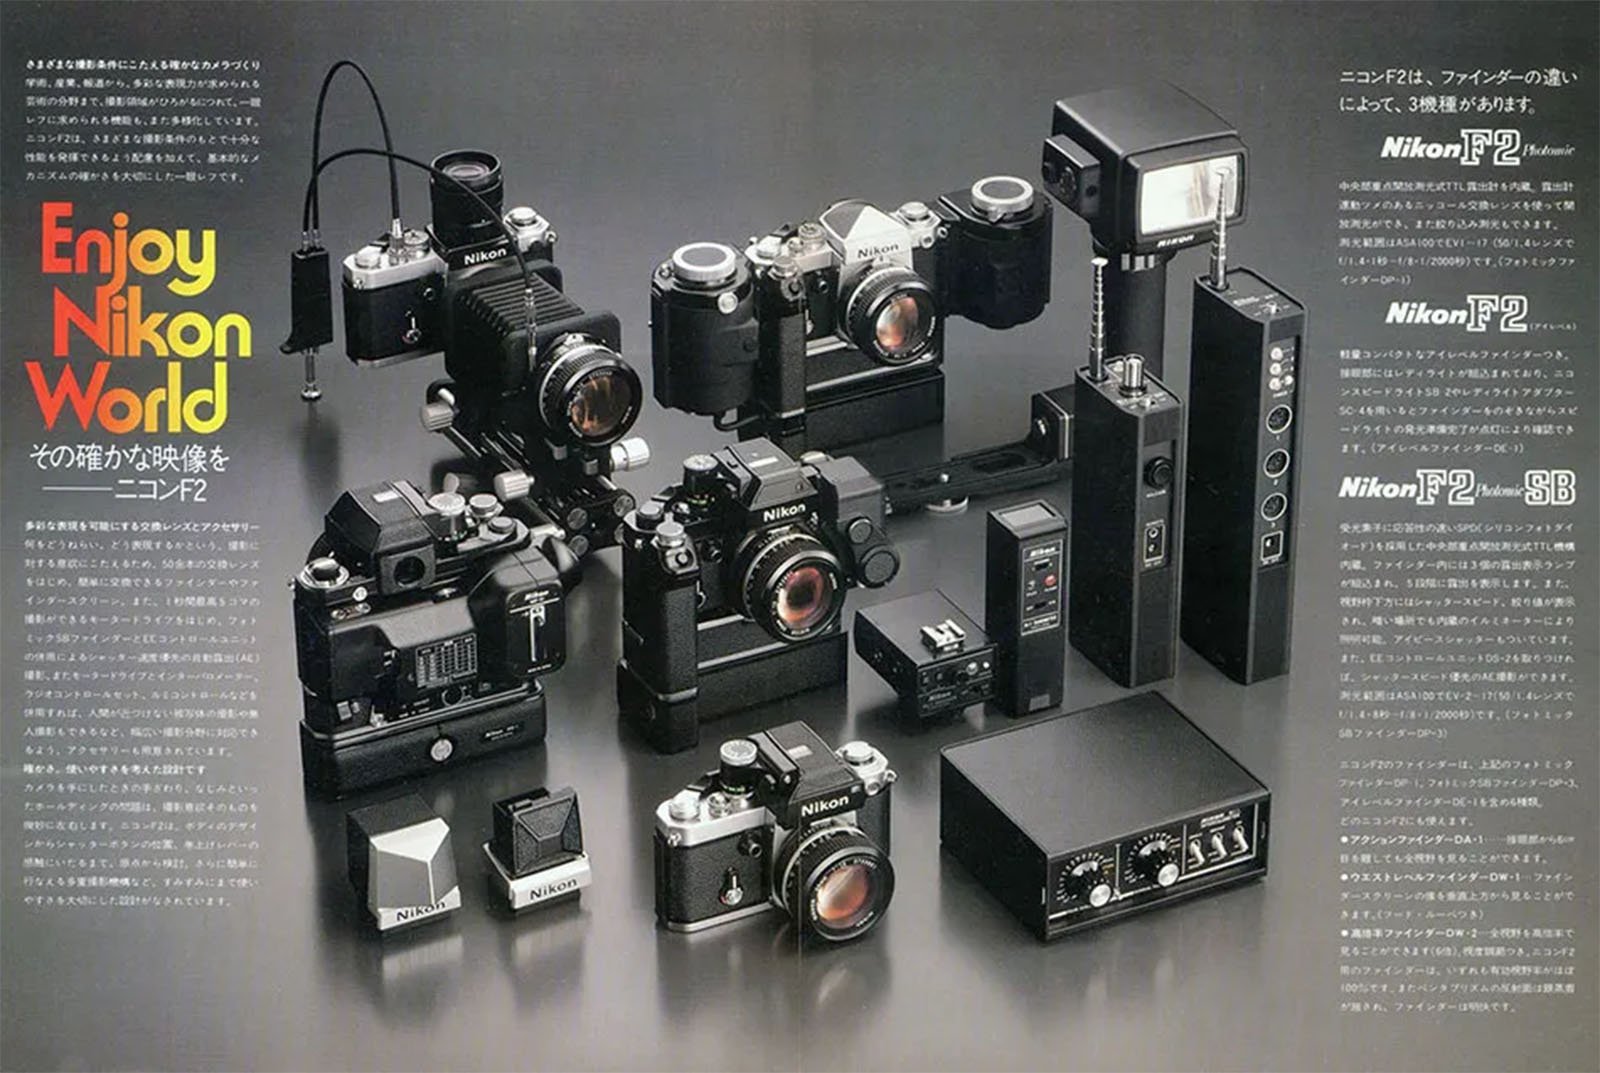 Vintage advertisement featuring various nikon camera models and photography equipment arranged neatly, with the text "enjoy nikon world" prominently displayed.